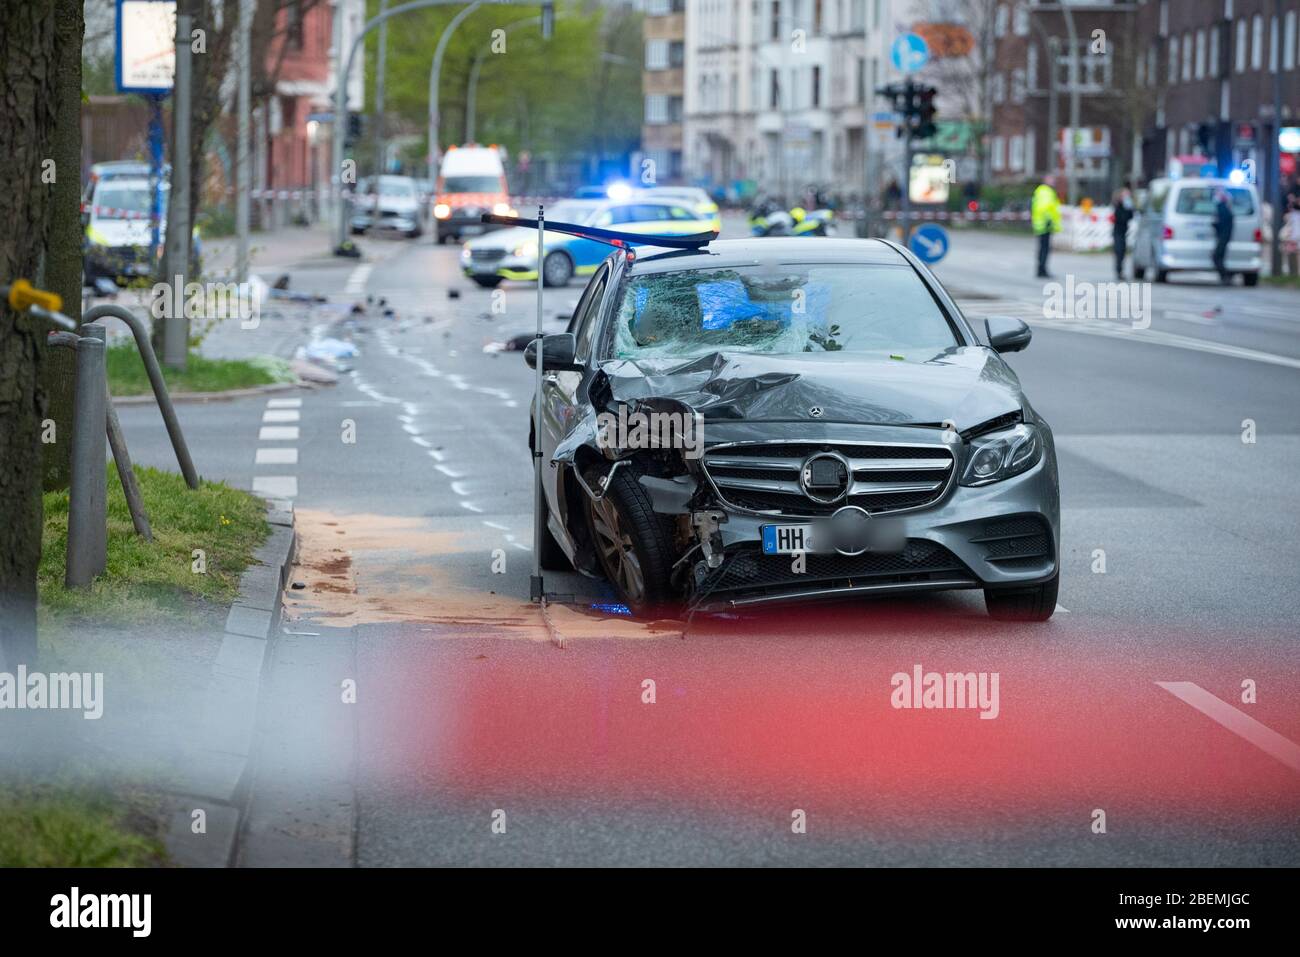 Hamburg, Germany. 14th Apr, 2020. The badly damaged Mercedes stands on the road after the accident. The vehicle had gone off the road in the Altona district, skidded into a traffic light and hit two people. The man and the woman suffered life-threatening injuries. The driver was 'apparently' intoxicated, according to a spokeswoman for the Hamburg Police Situation Center. Credit: Jonas Walzberg/dpa - ATTENTION: The license plate was pixelated for legal reasons/dpa/Alamy Live News Stock Photo